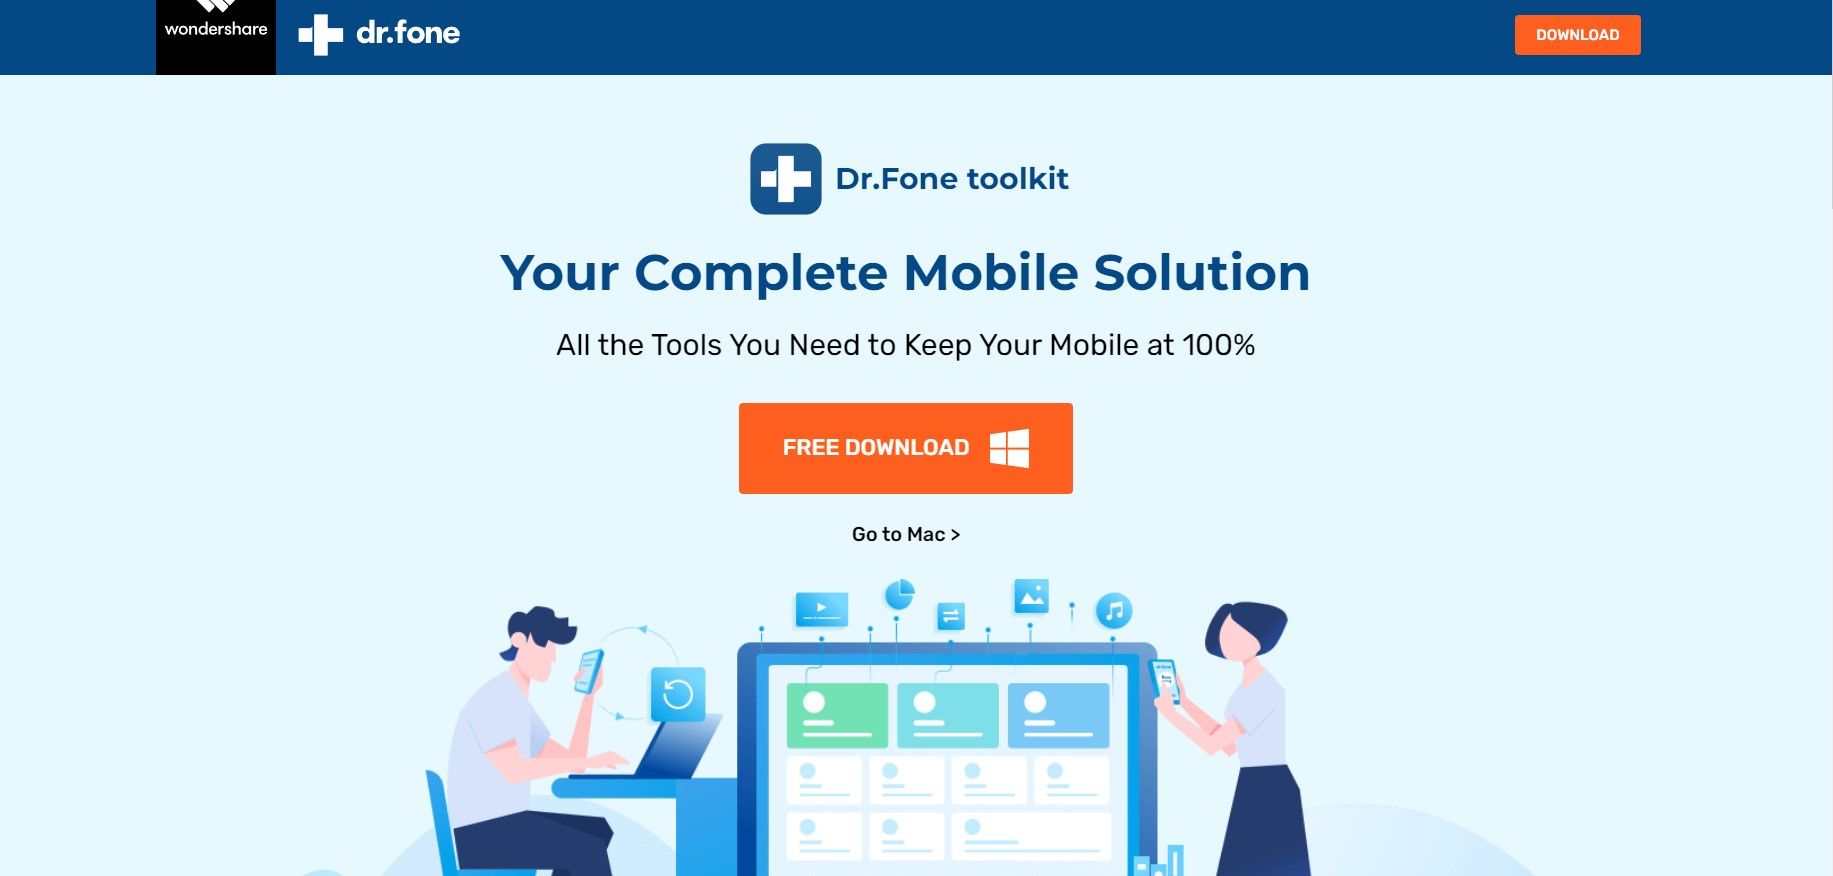 Dr. fone whatsapp recovery tool